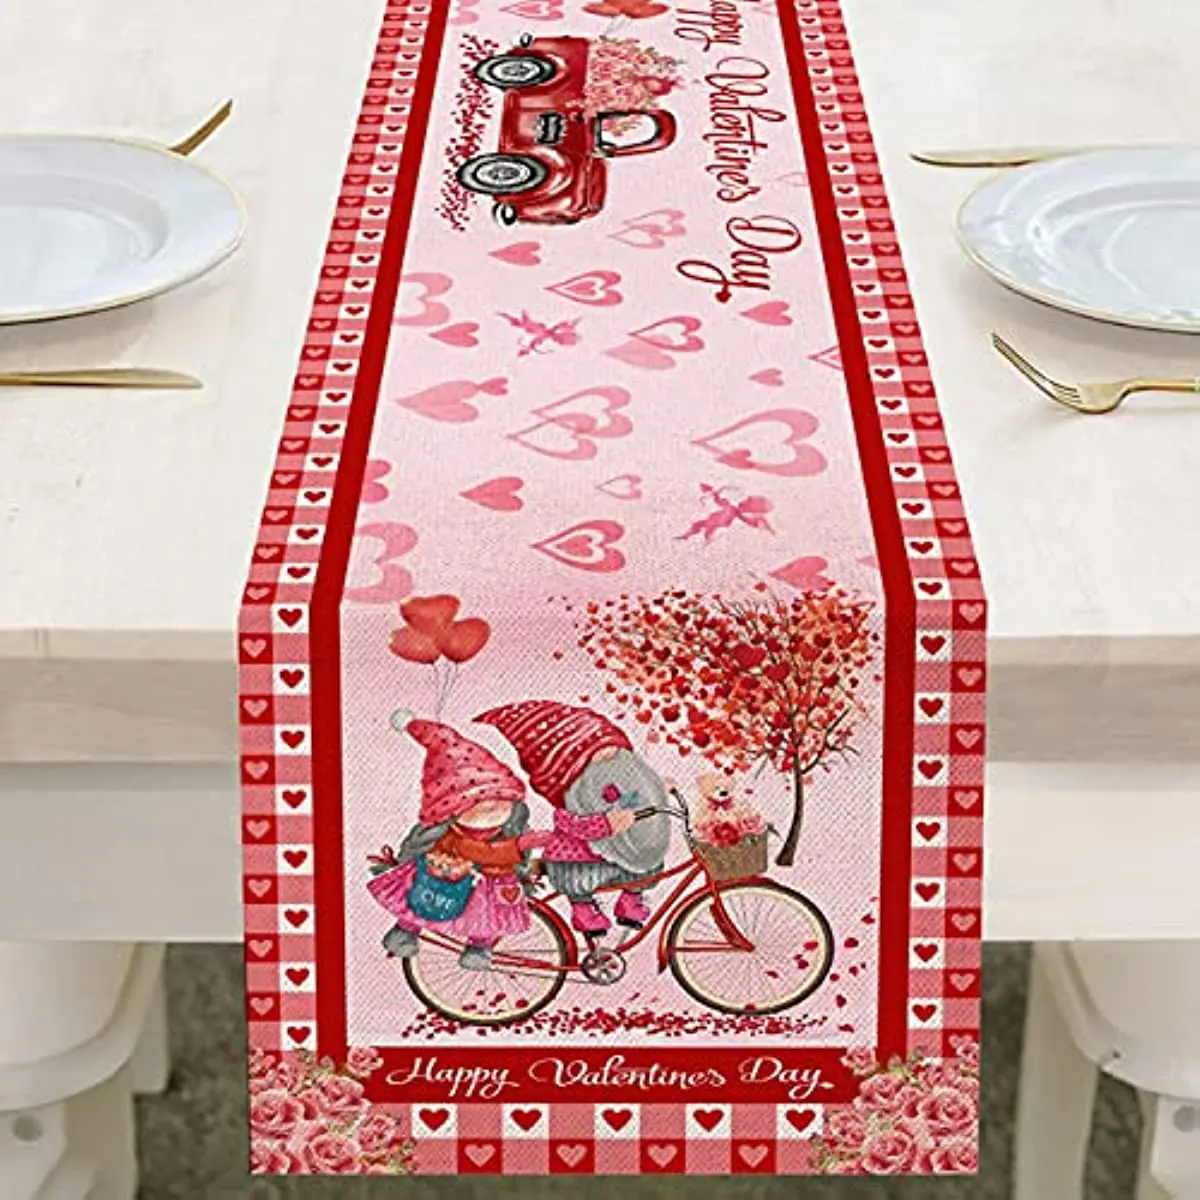 Valentines Day Red Truck Burlap Table Runner Wedding Decoration Gnomes Love Hearts Pink Dining Table Runner Holiday Party Decor